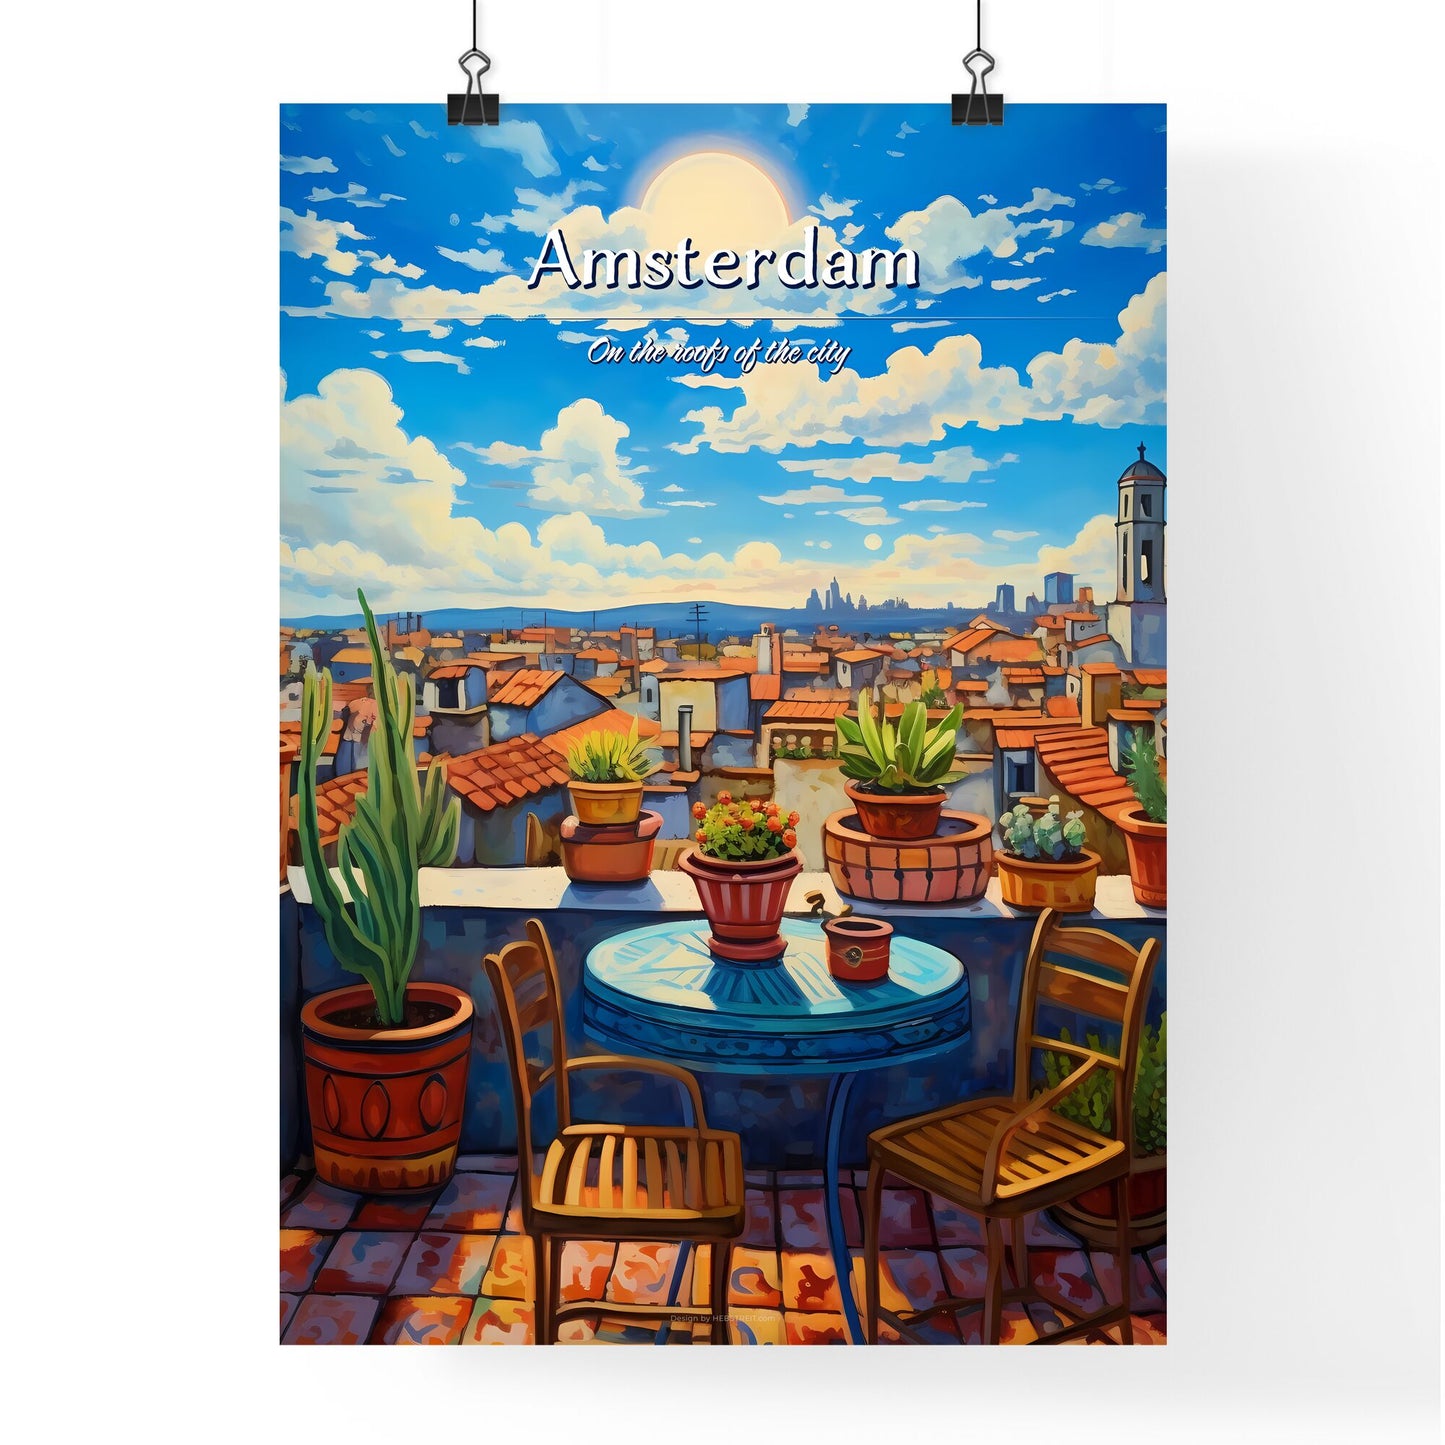 On the roofs of Amsterdam - Art print of a table and chairs on a rooftop with potted plants Default Title